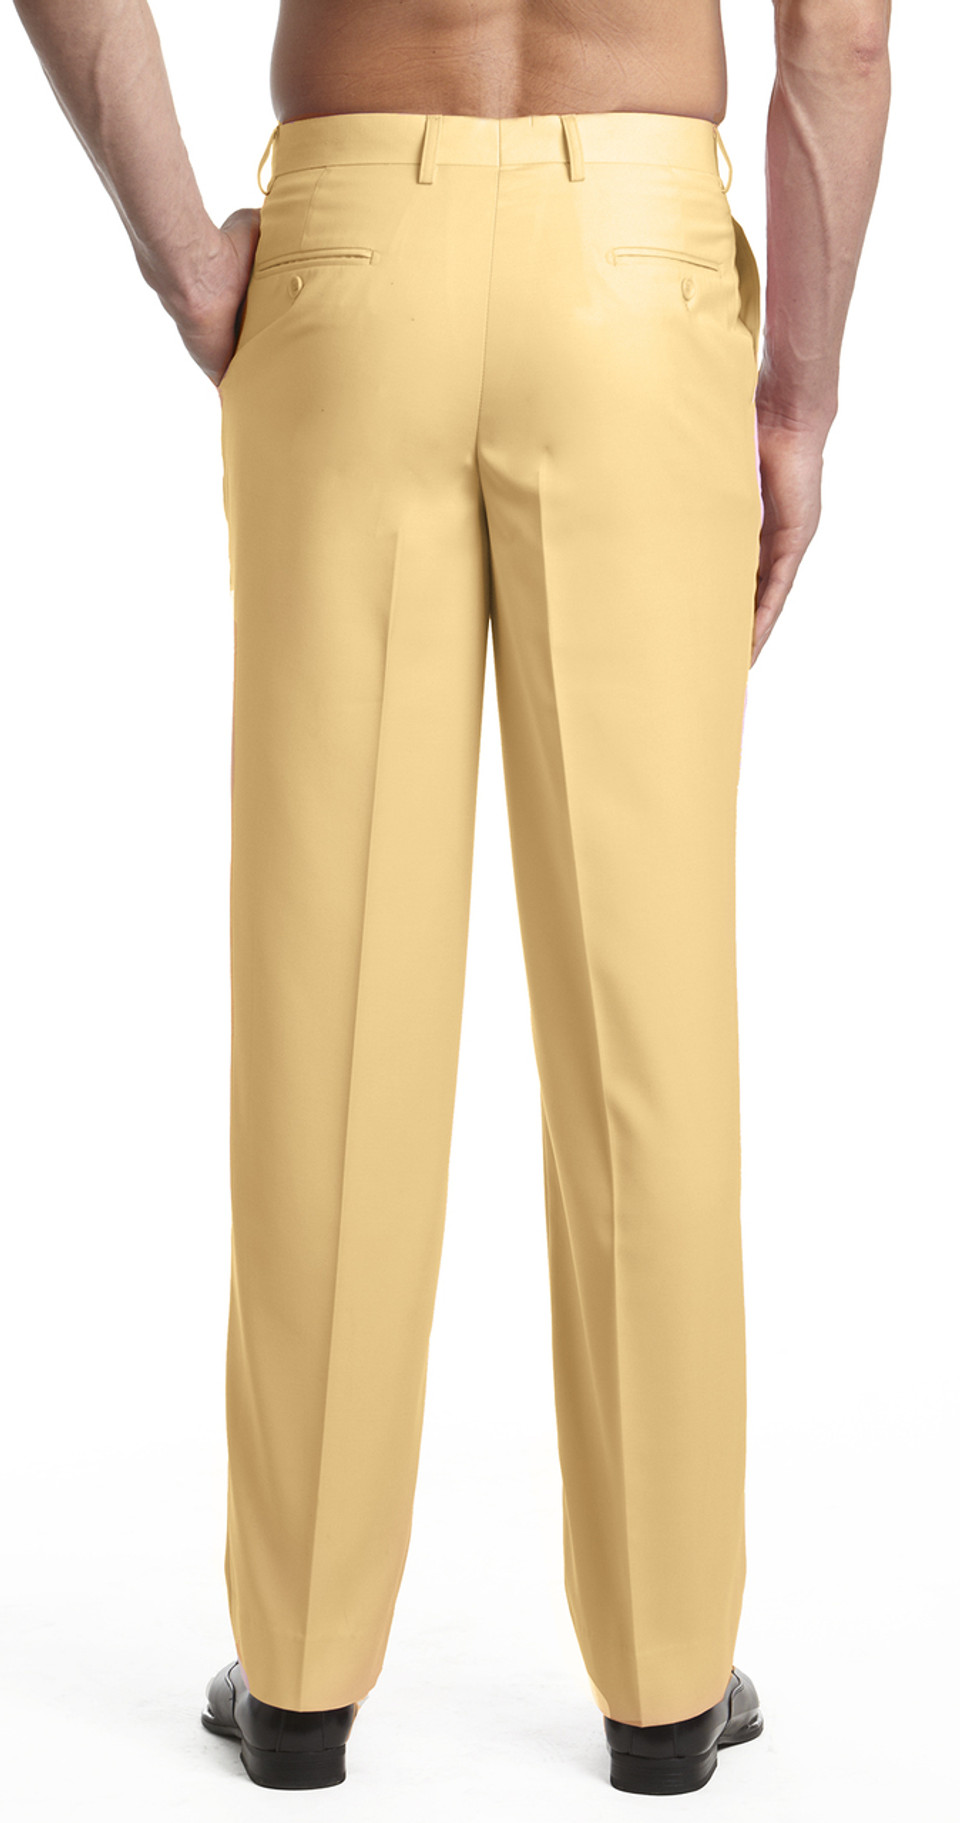 Gold Color Pants for Men | Concitor Collection Trouser